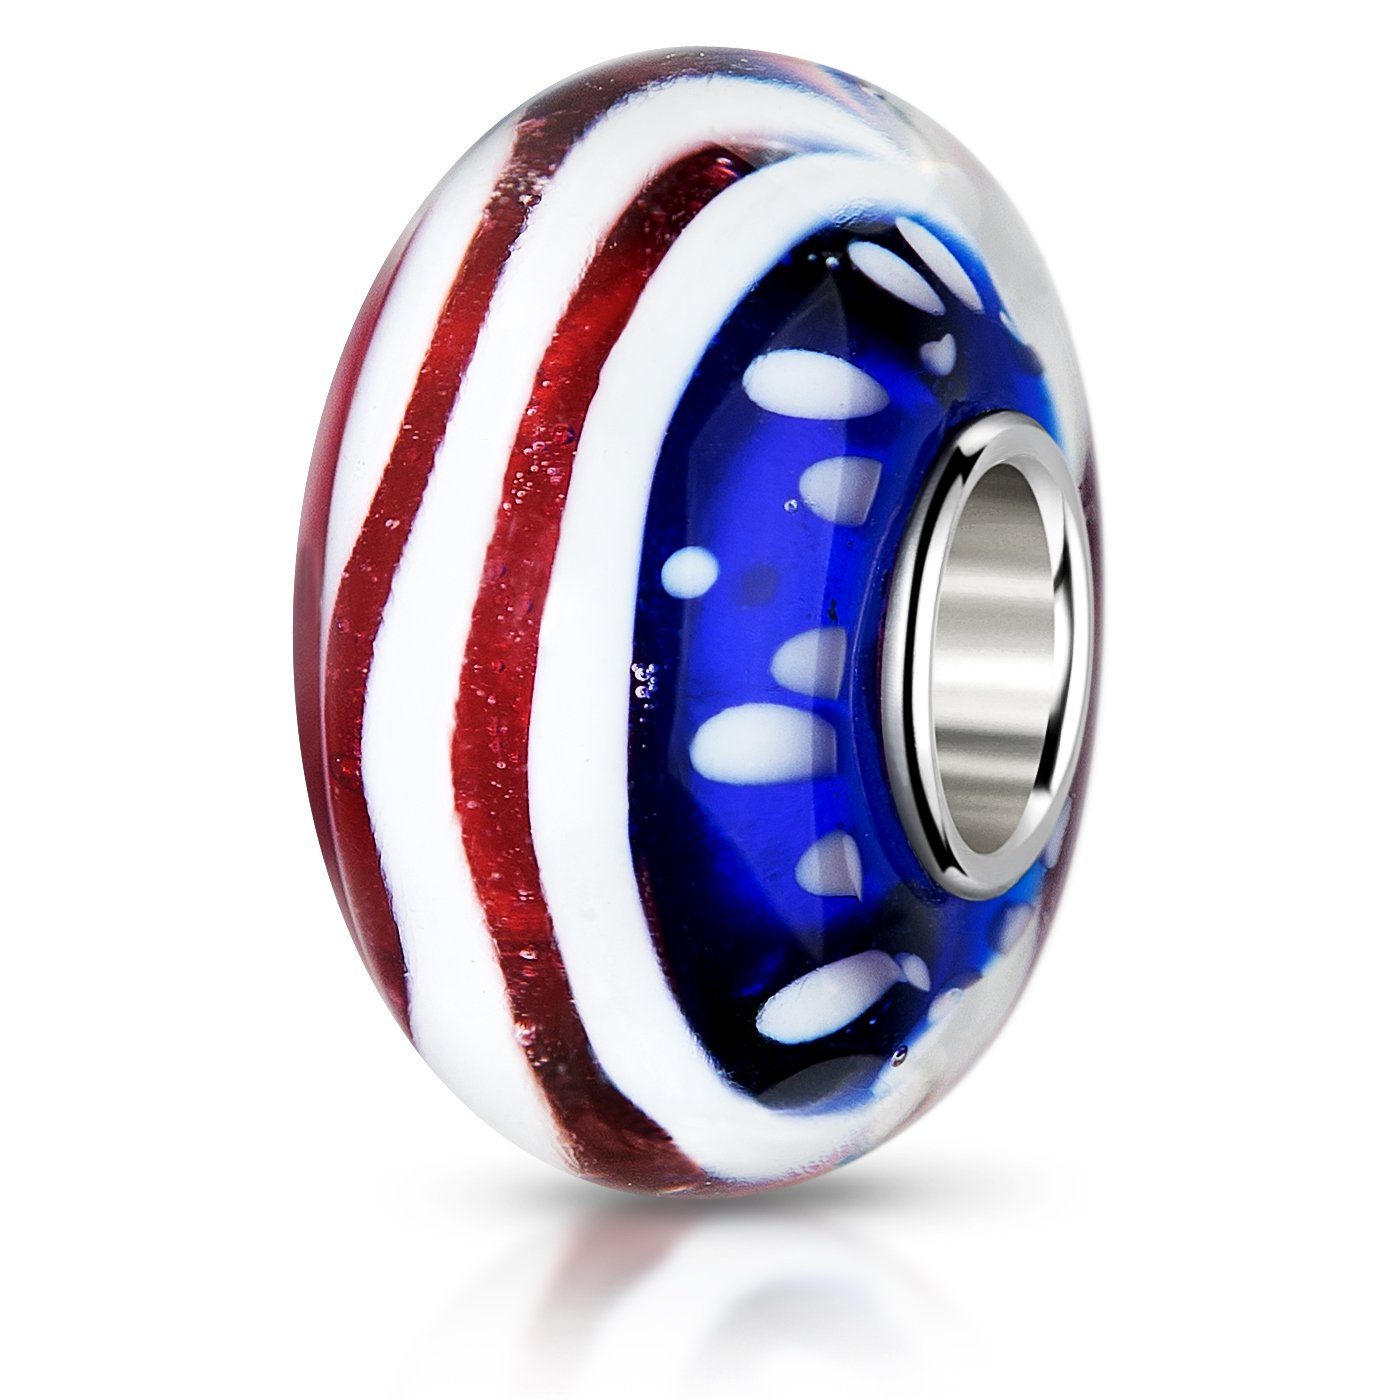 Materia Bead Glasperle Flagge USA / Stars and Stripes 1420, Kern aus 925 Sterling Silber | Beads